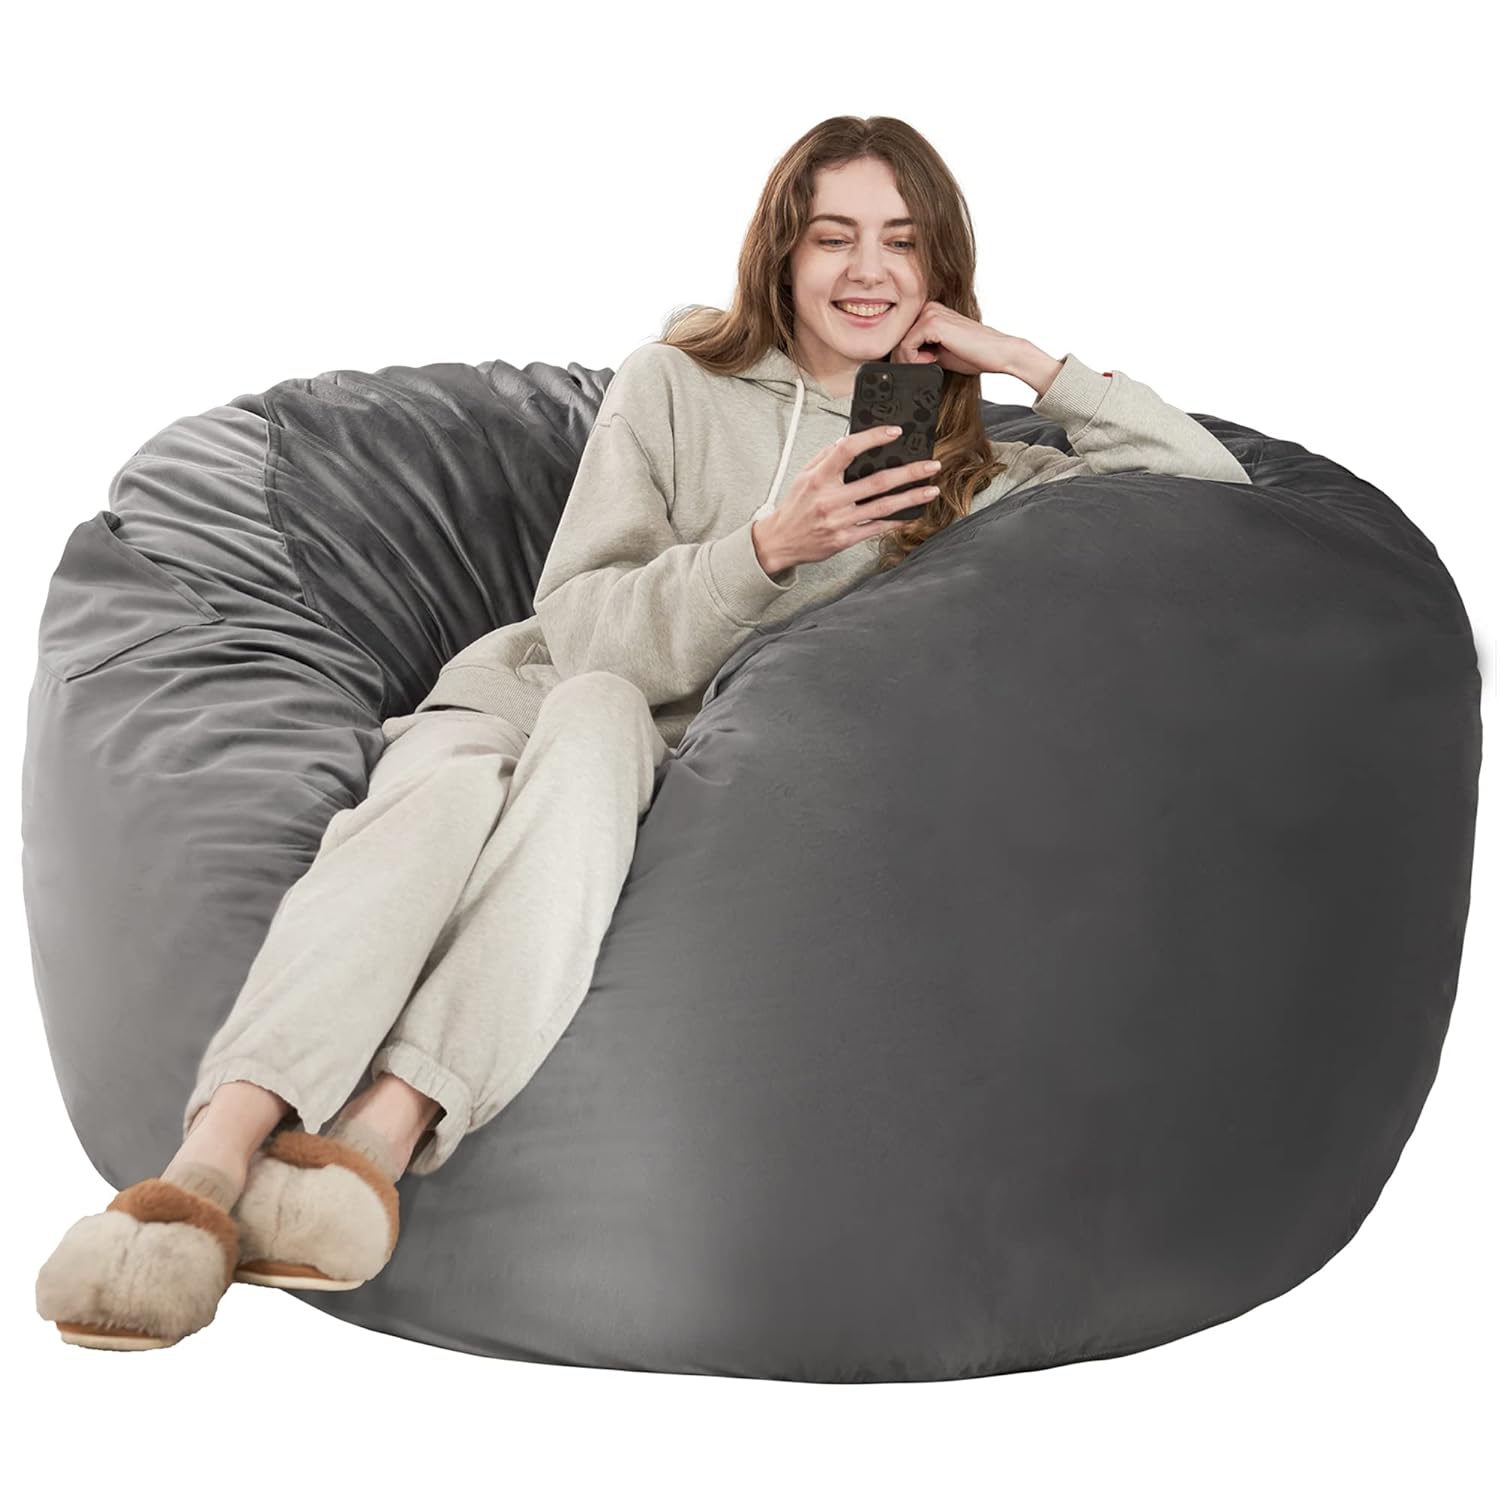 Great Choice Products Bean Bag Chair: Giant 4' Memory Foam Furniture Bean Bag Chairs For Adults With Microfiber Cover - 4Ft, Grey?